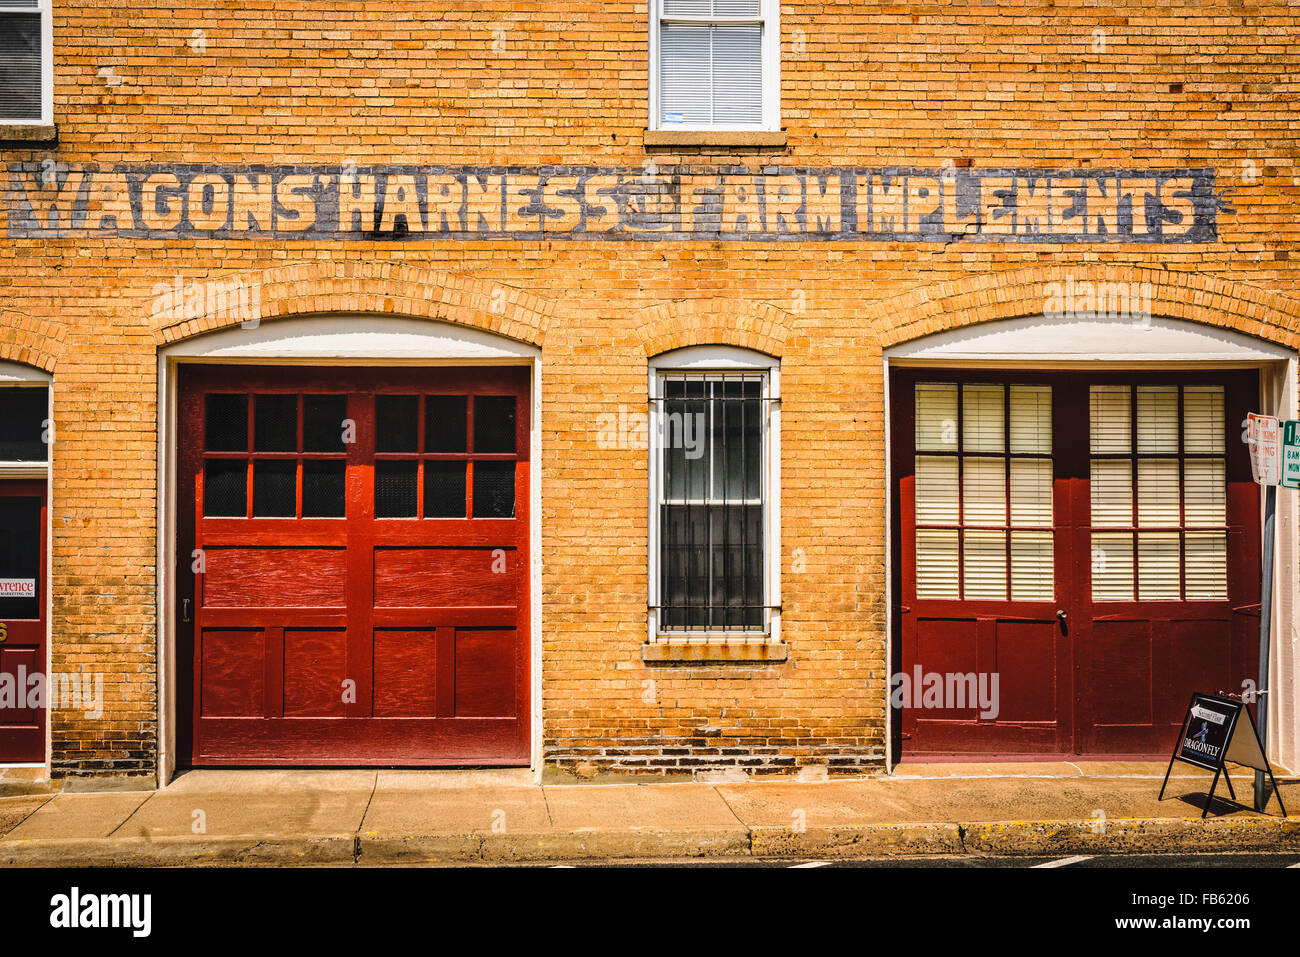 Wagons' Harness and Farm Implements Ghost Sign, 24 Ashby Street ...